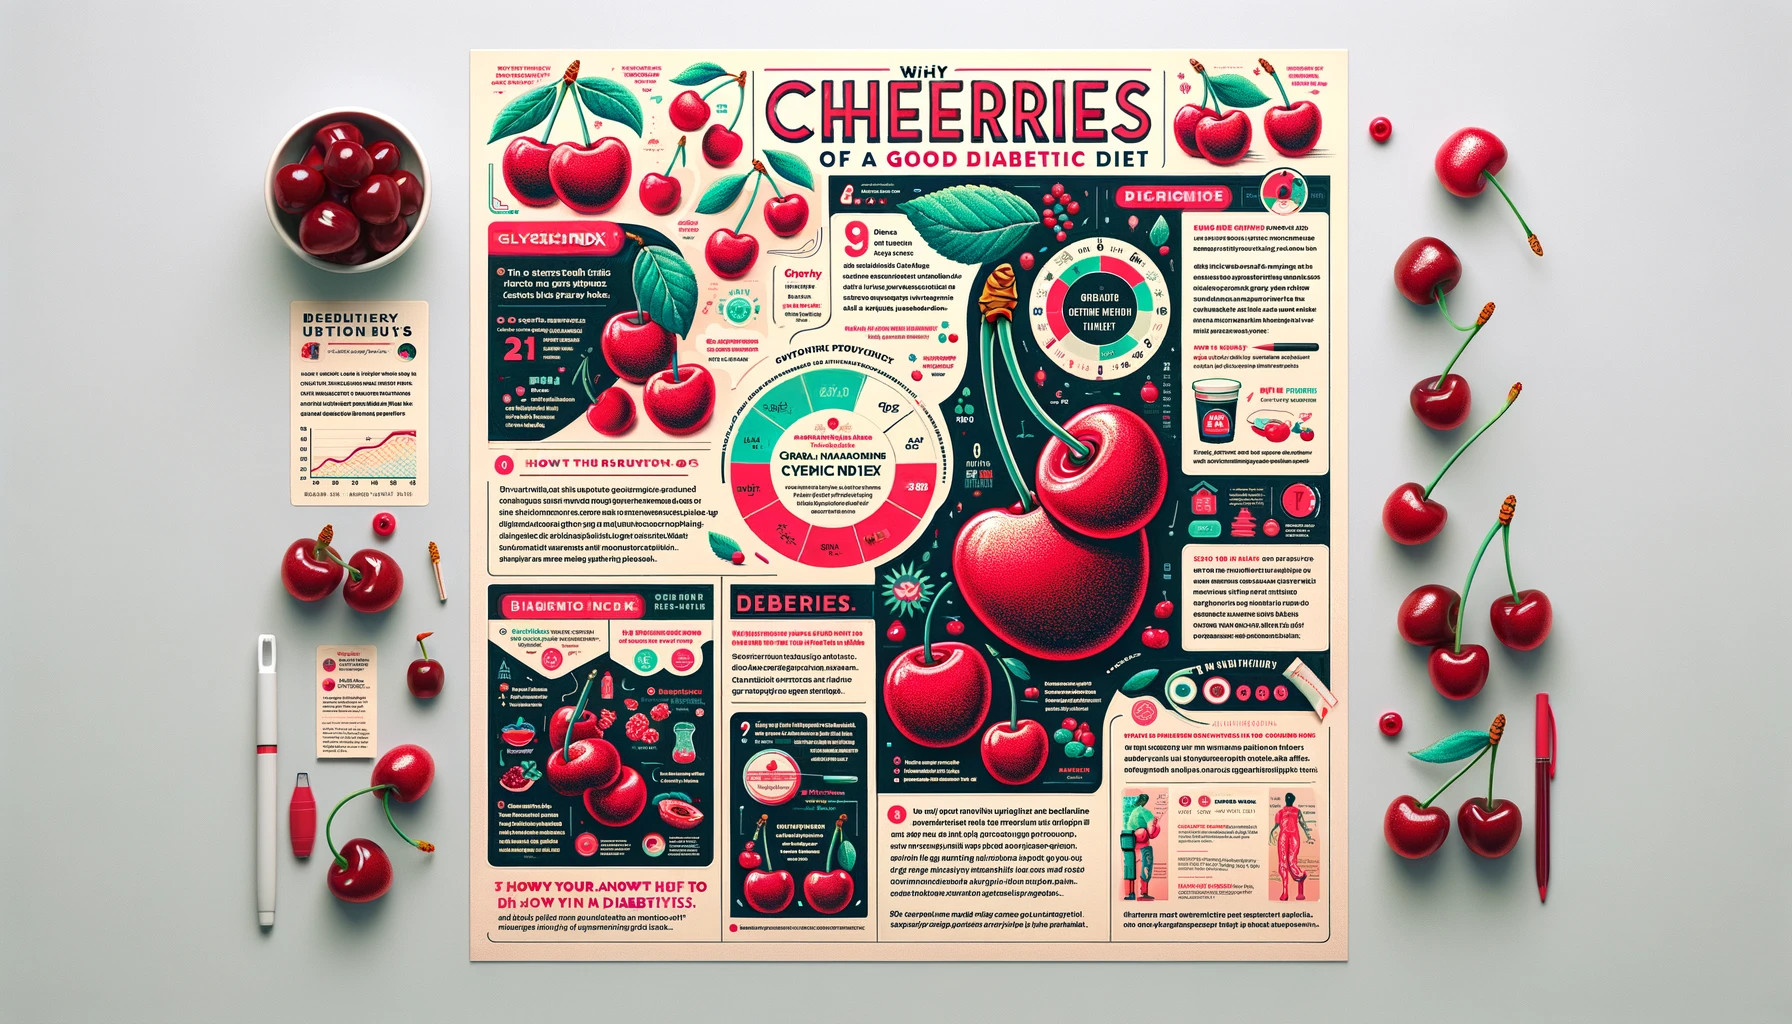 educational infographic detailing the nutritional profile of cherries, their glycemic index, and tips for a diabetic diet